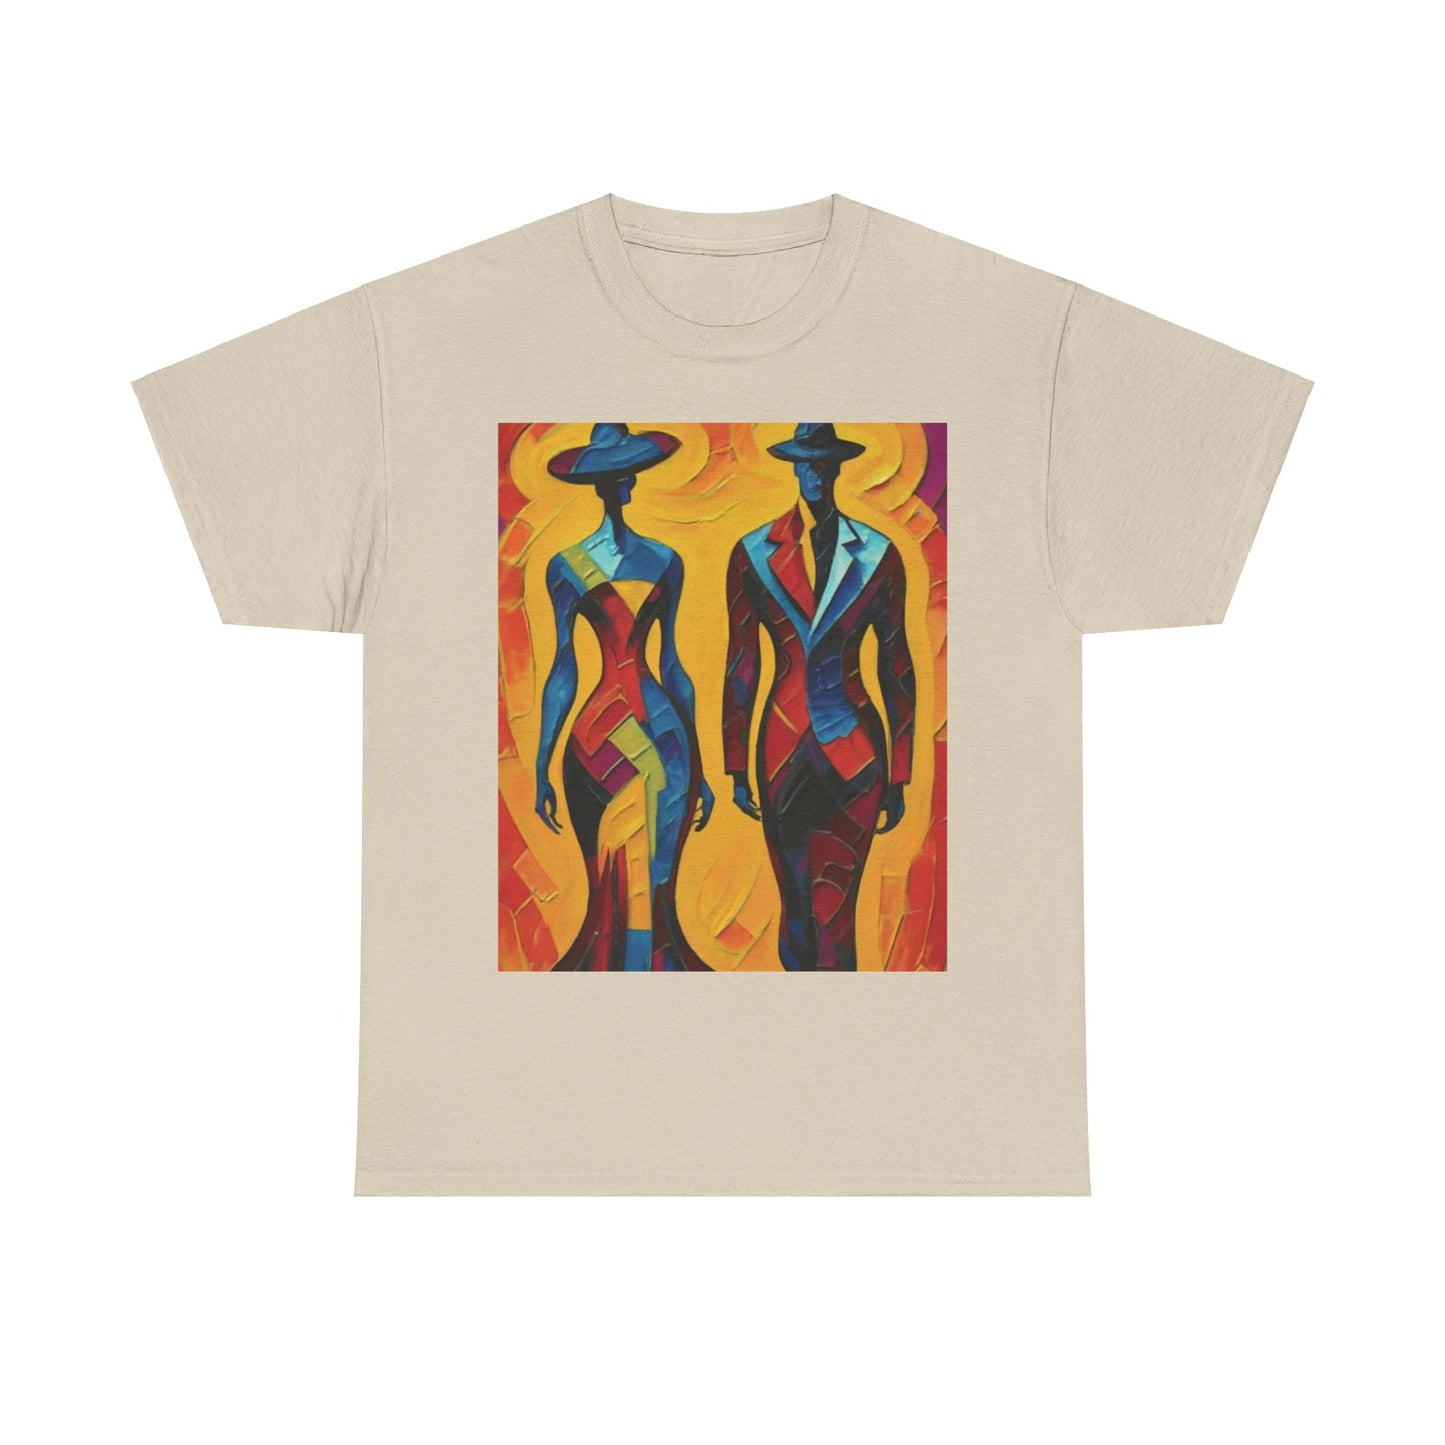 "Steppin' Out" T-shirt